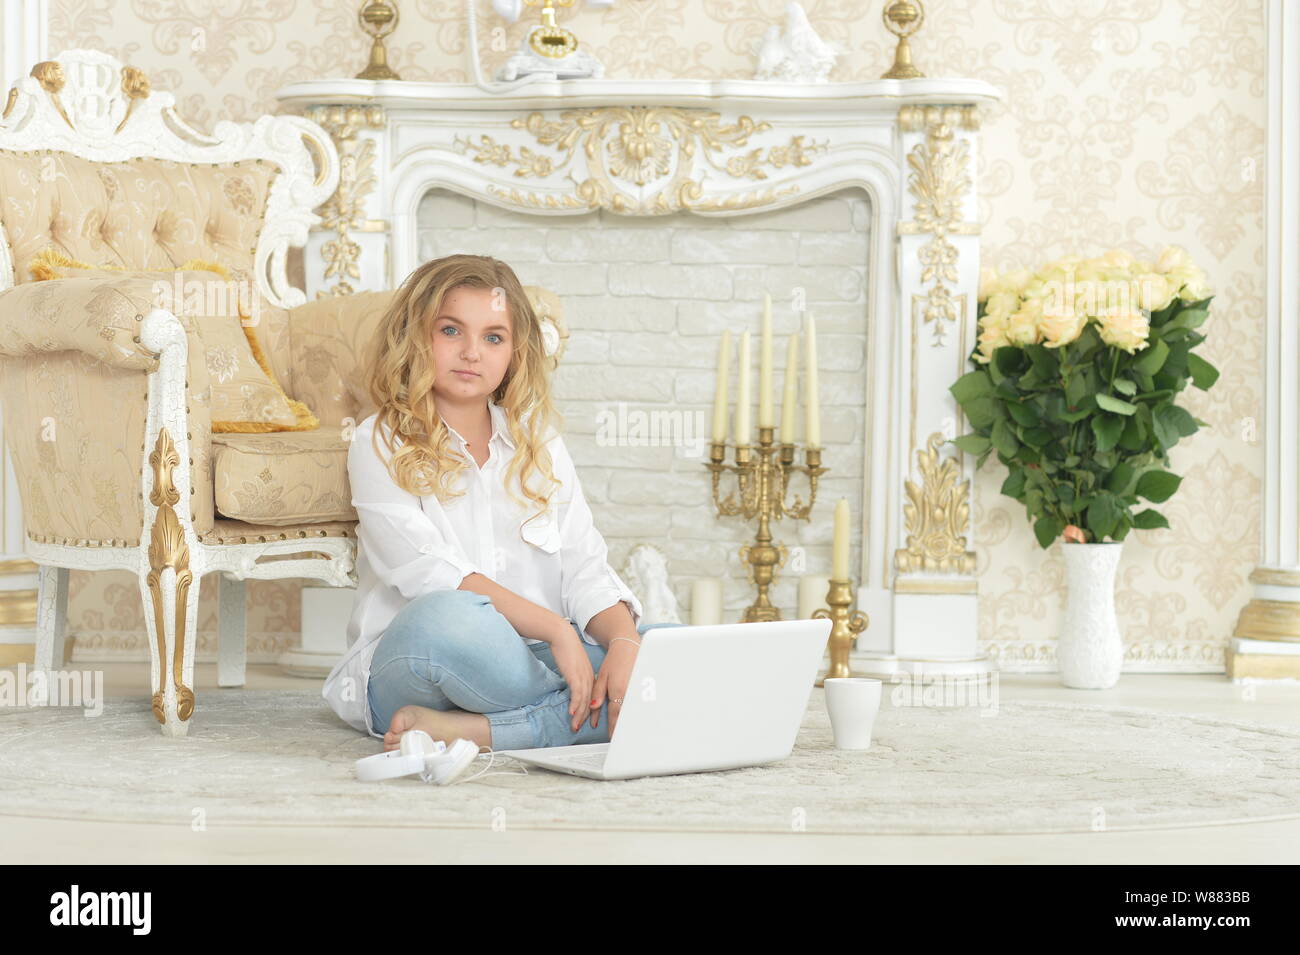 Curly blonde woman in casual clothing sitting on floor Banque D'Images